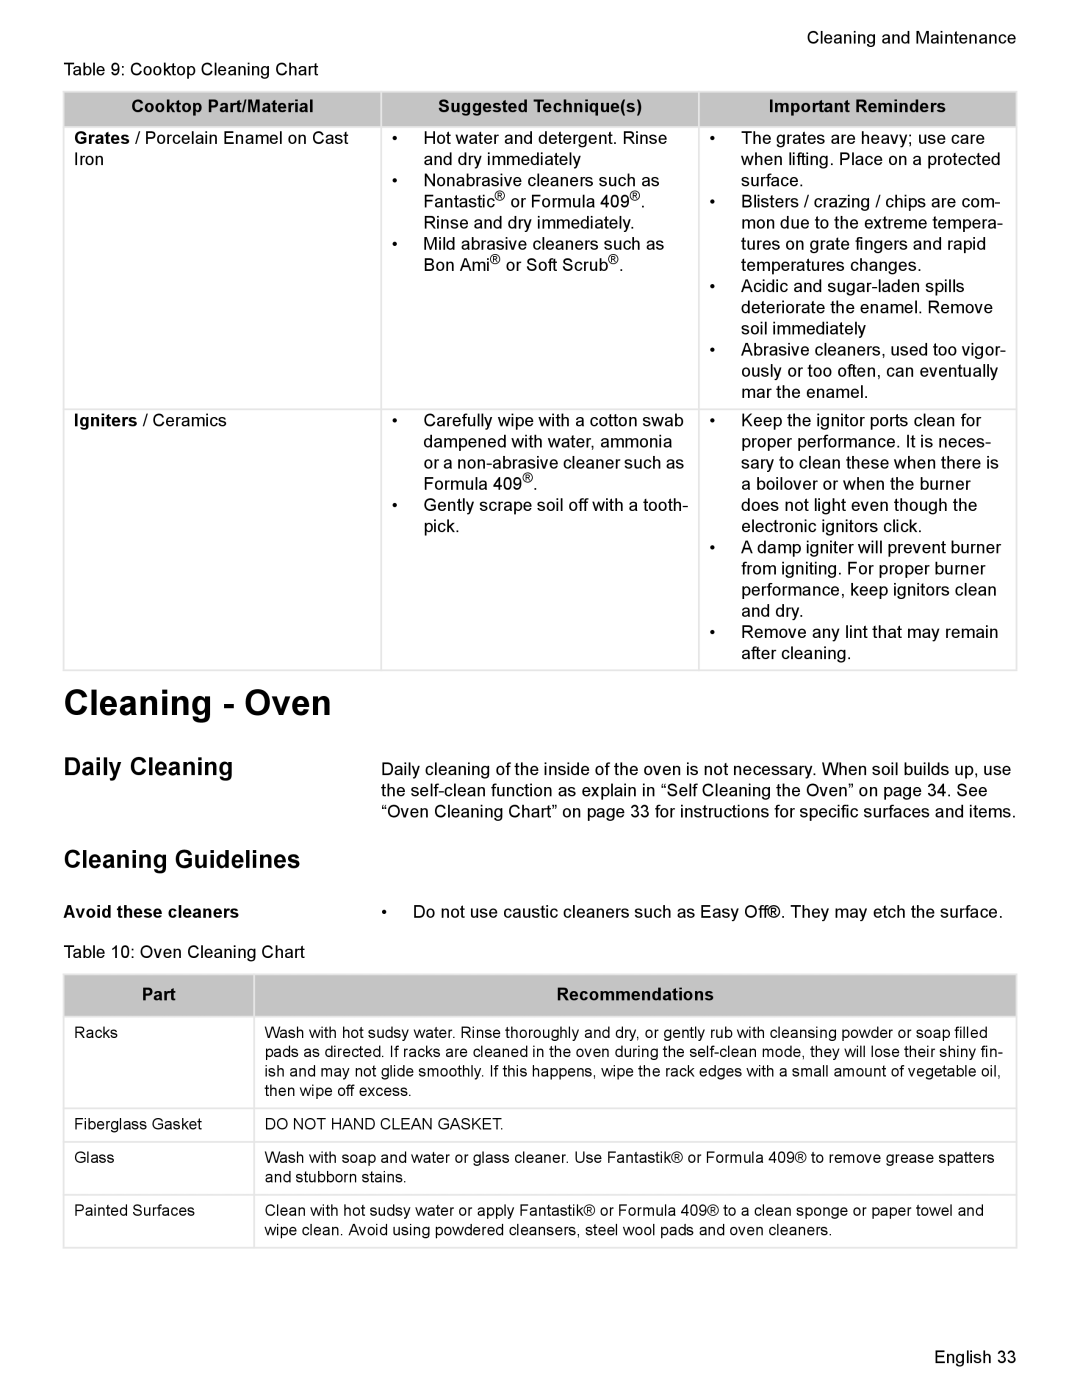 Bosch Appliances HGS7282UC Cleaning - Oven, Daily Cleaning, Cleaning Guidelines, Cooktop Part/Material, Recommendations 